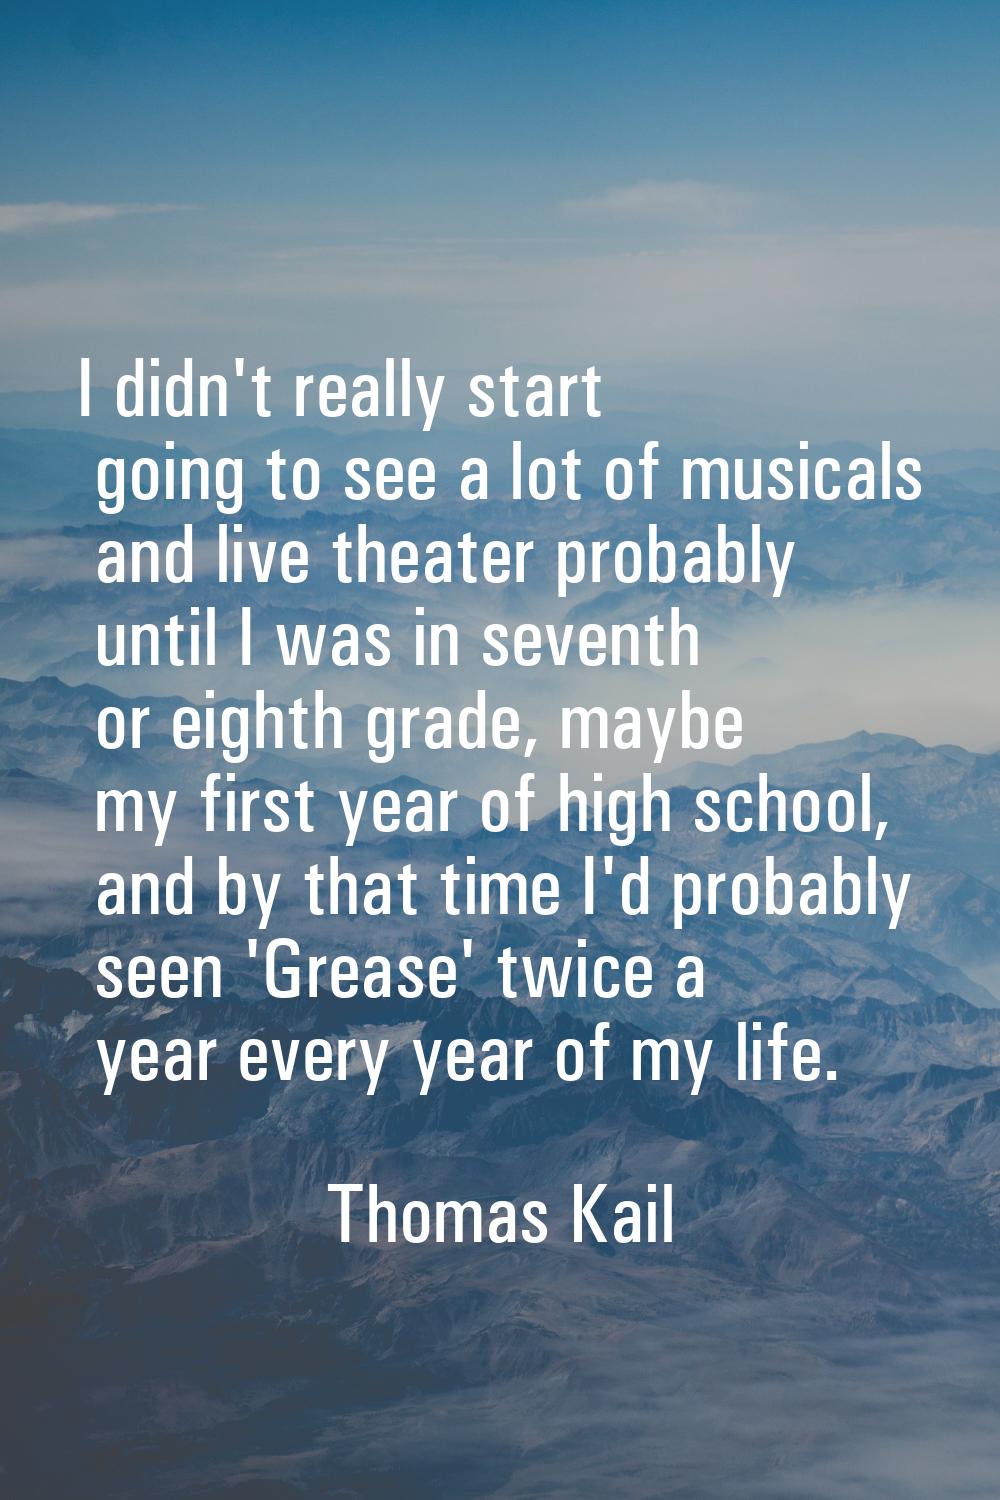 I didn't really start going to see a lot of musicals and live theater probably until I was in seven